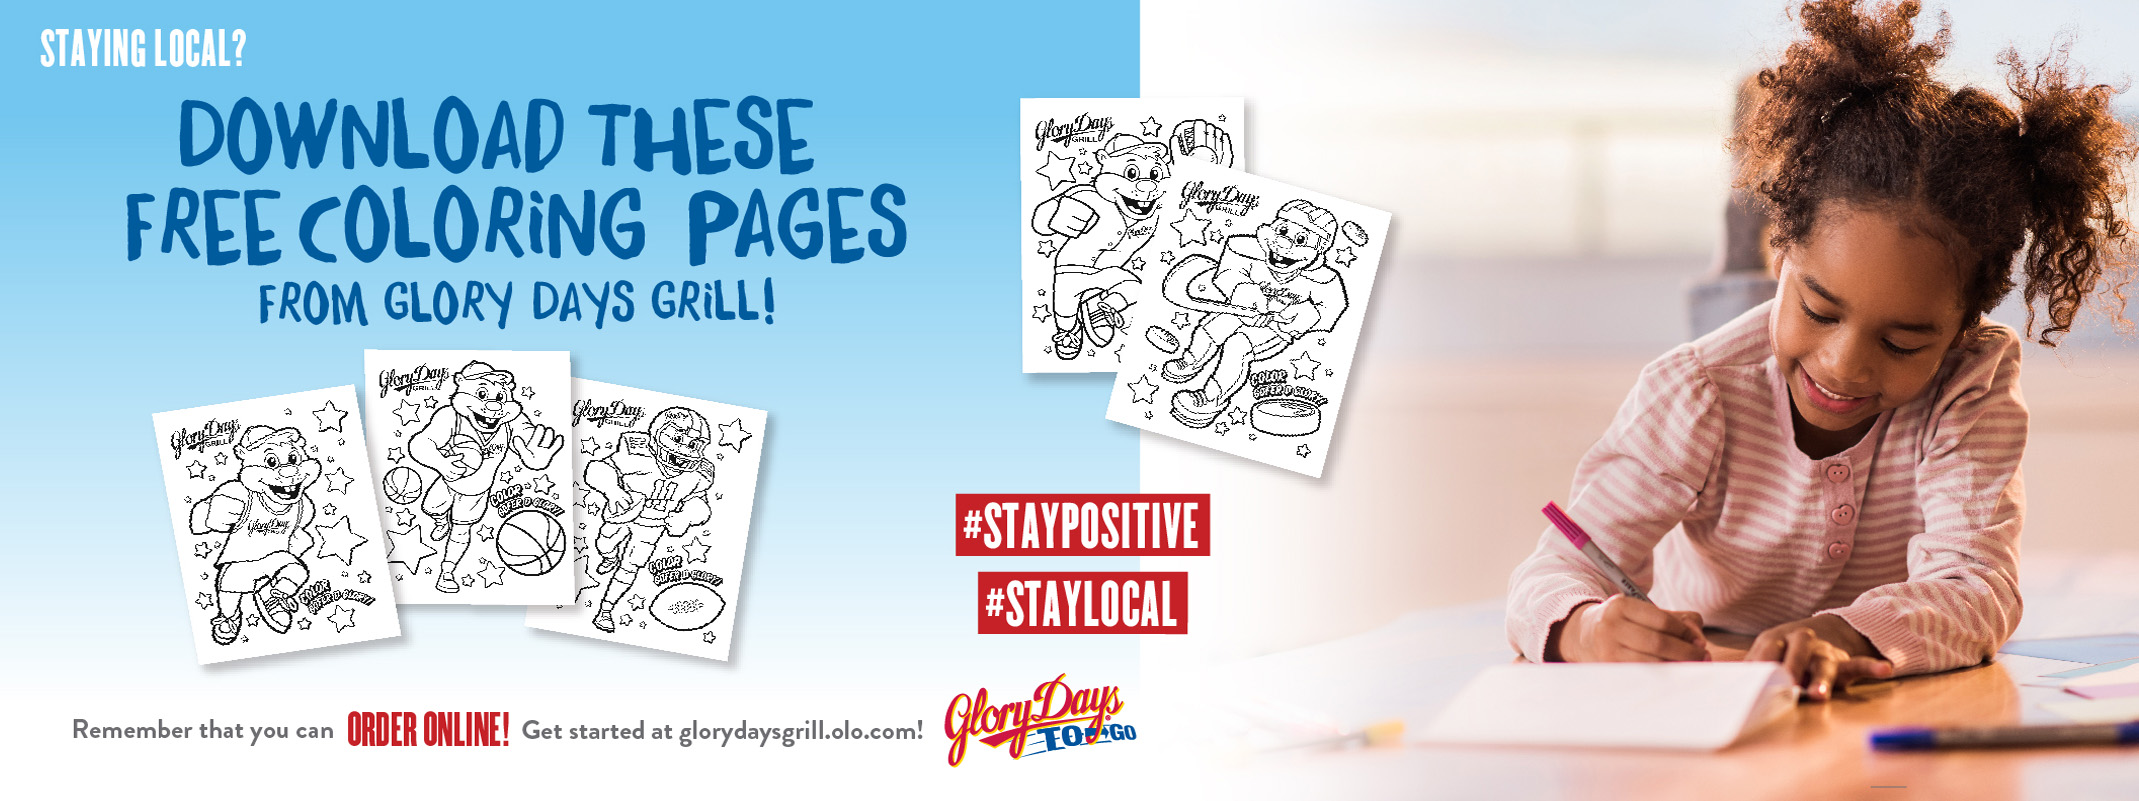 Download these free coloring pages from Glory Days Grill!